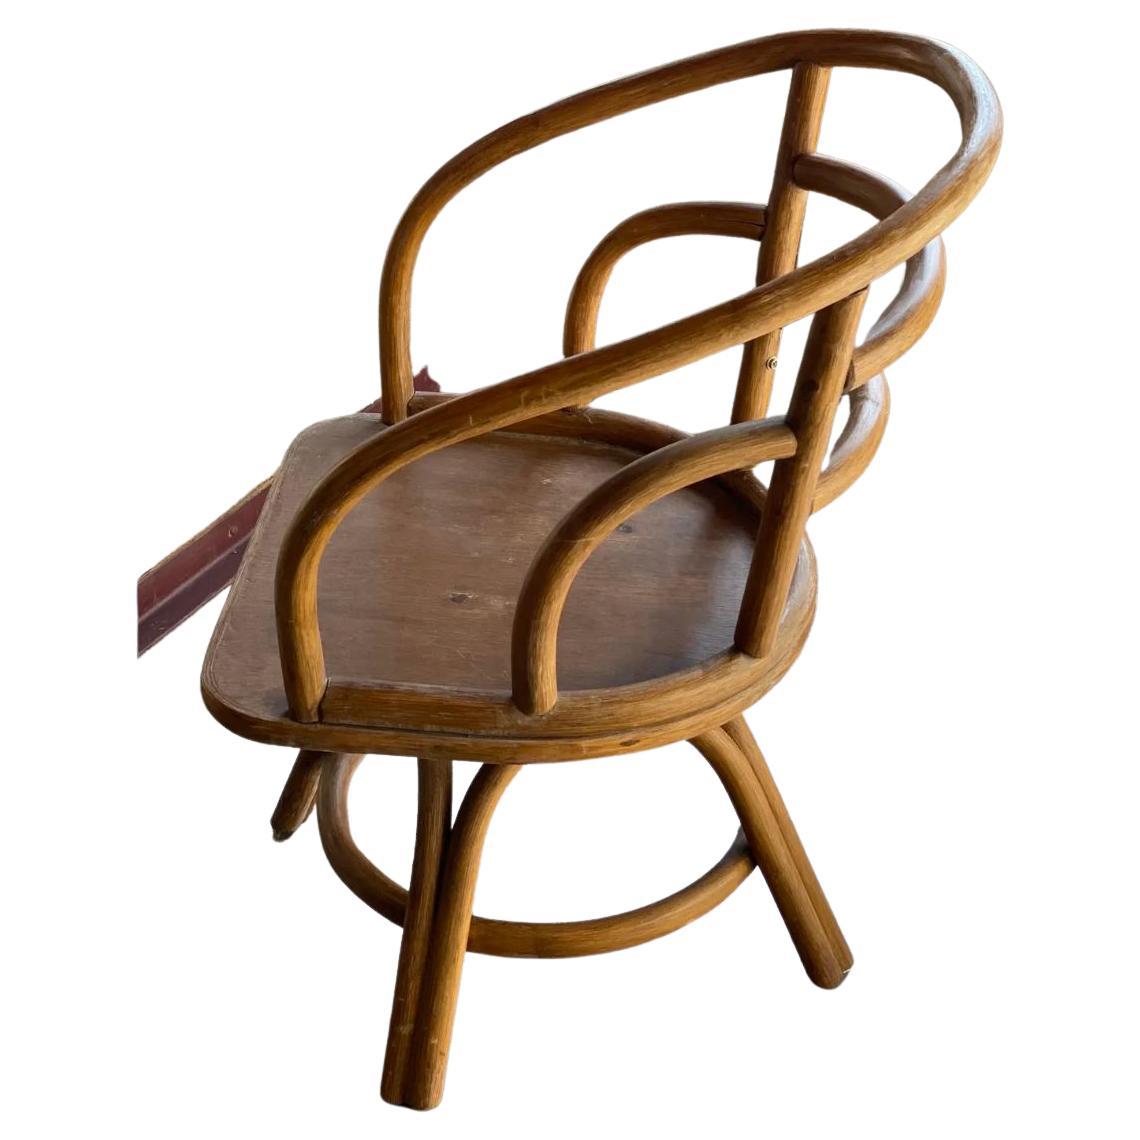 Set of 4 Solid Bamboo French Bistro inspired swivel dining Chairs. Great Parisian flair, the curved backs and rounded seat gives these unique chairs a great style to use as side chairs, game table chairs, as well as table chairs.